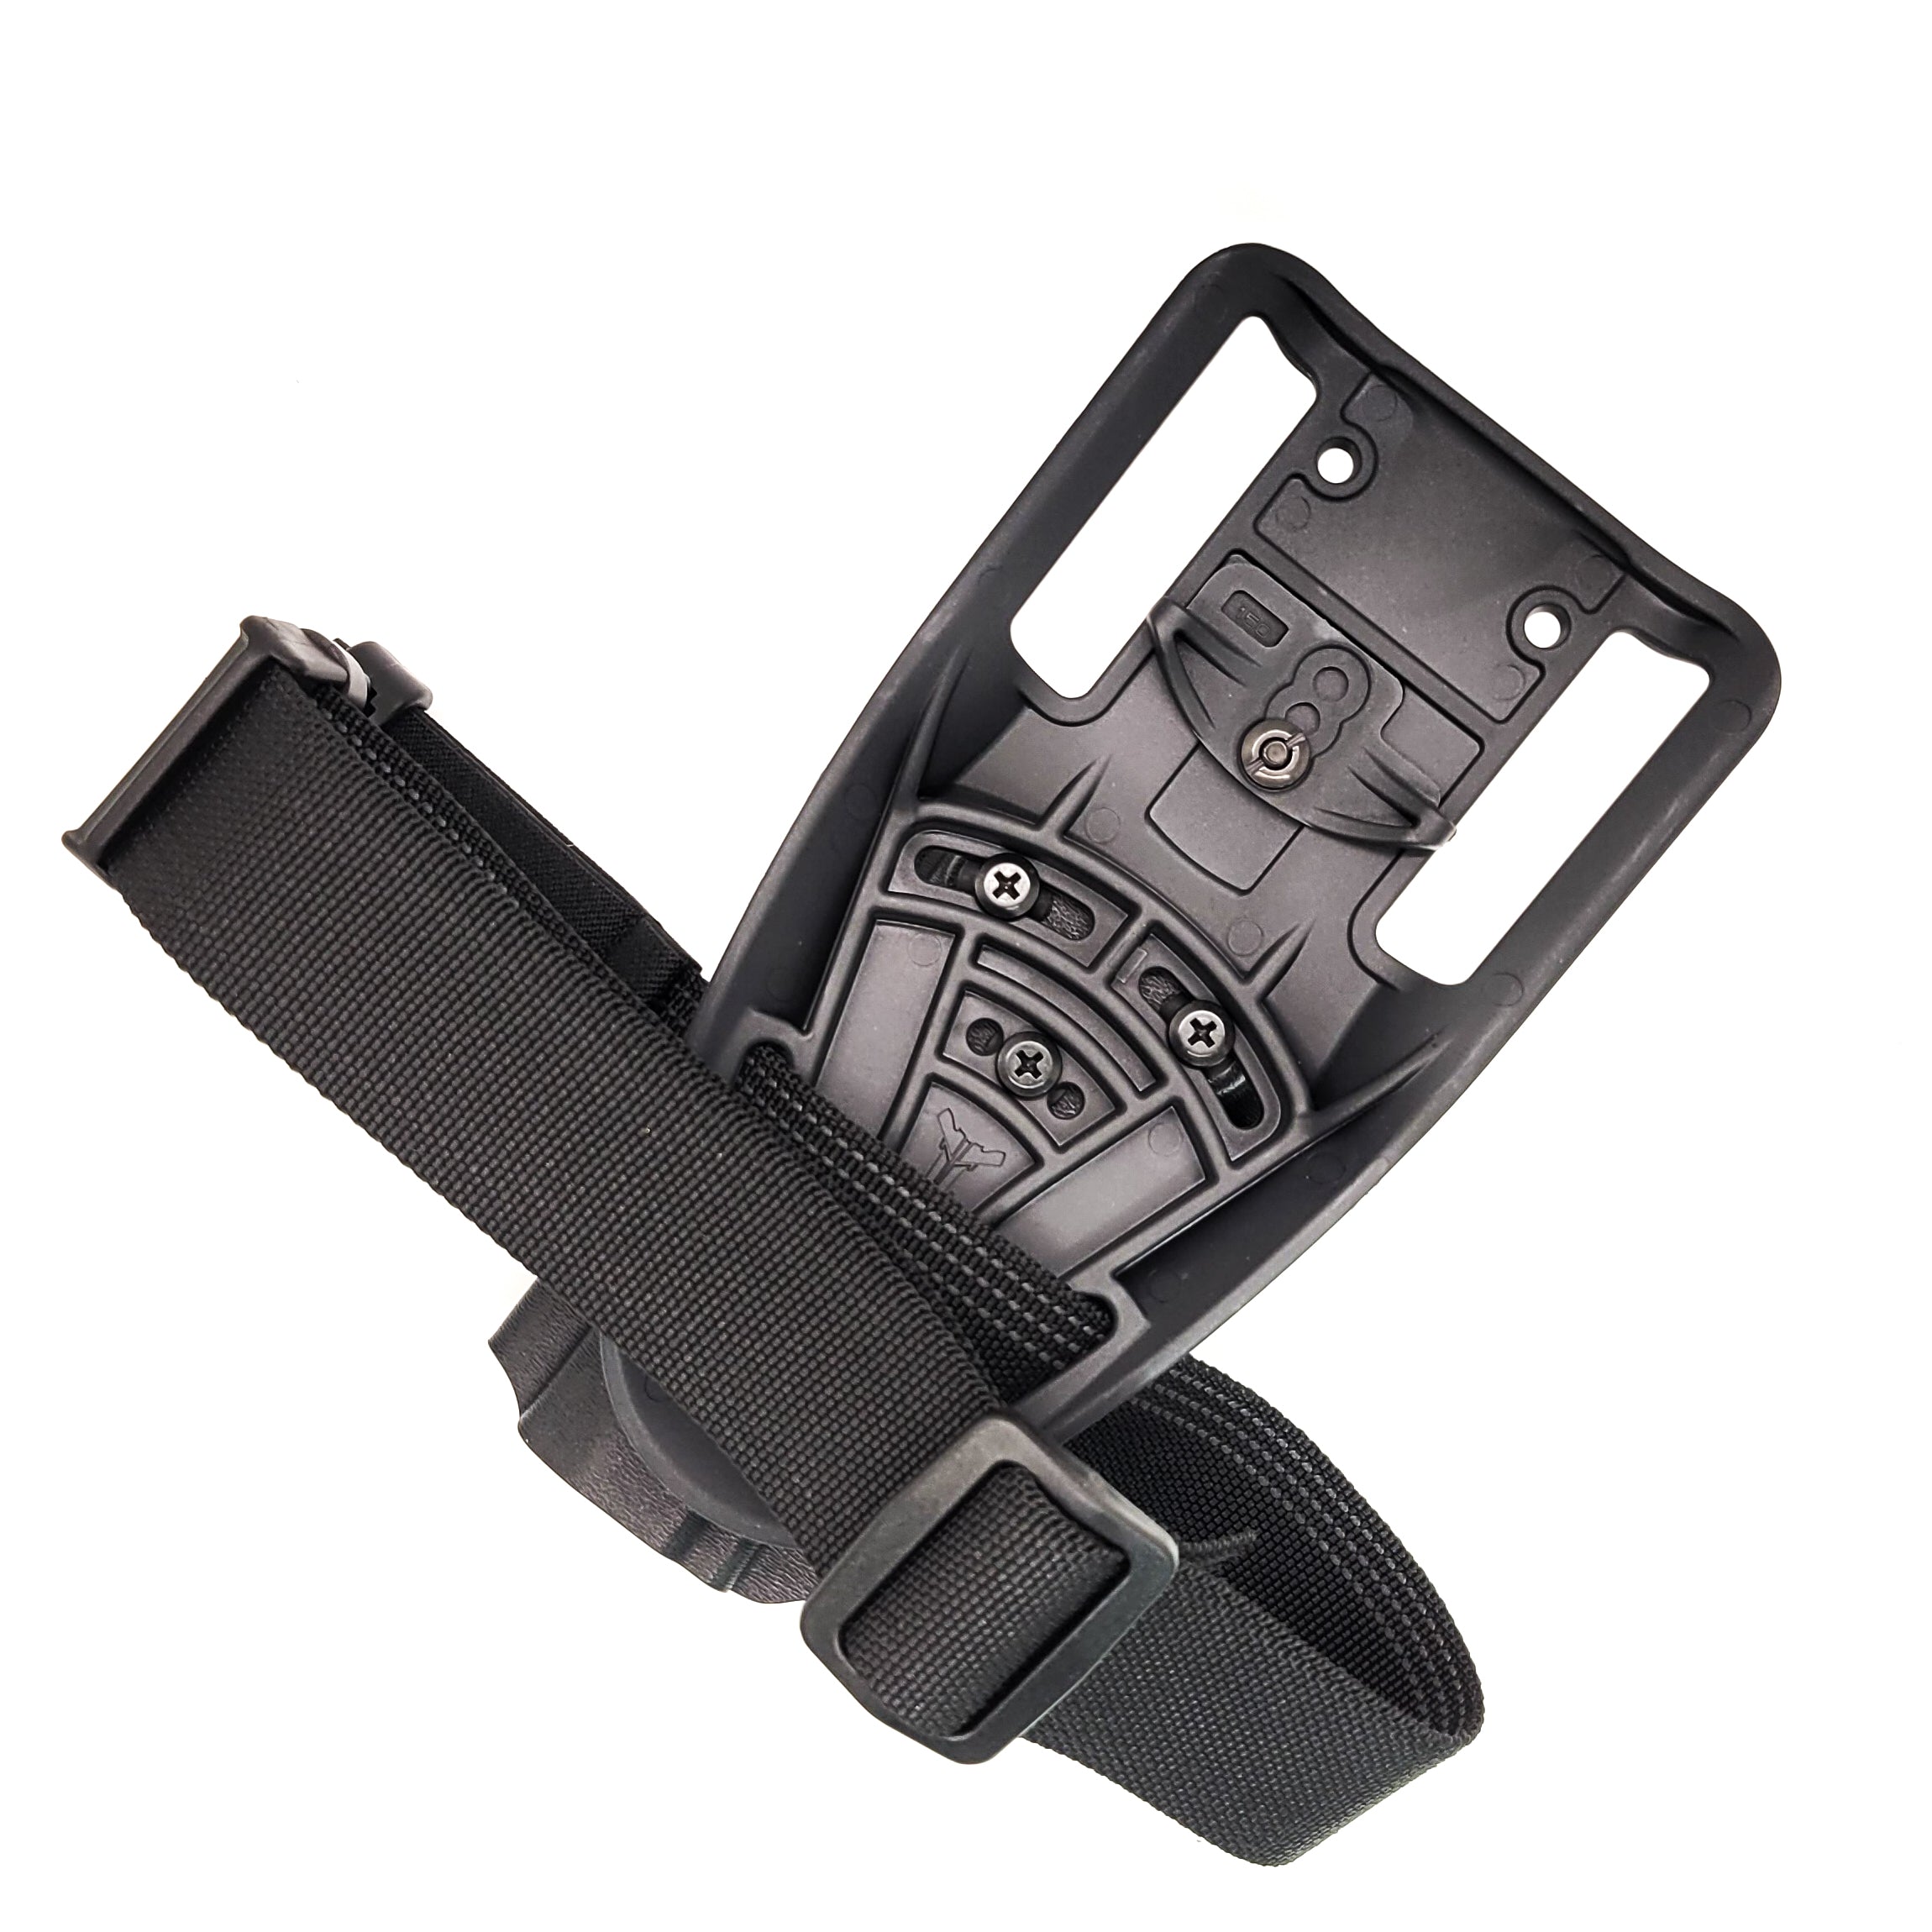 For the best Outside Waistband Duty & Competition Kydex Holster designed to fit the Sig Sauer P365-XMACRO handgun, shop Four Brothers Holsters.  Full sweat guard, adjustable retention, minimal material, and smooth edges to reduce printing. Made in the USA. Open muzzle for threaded barrels, cleared for red dot sights.